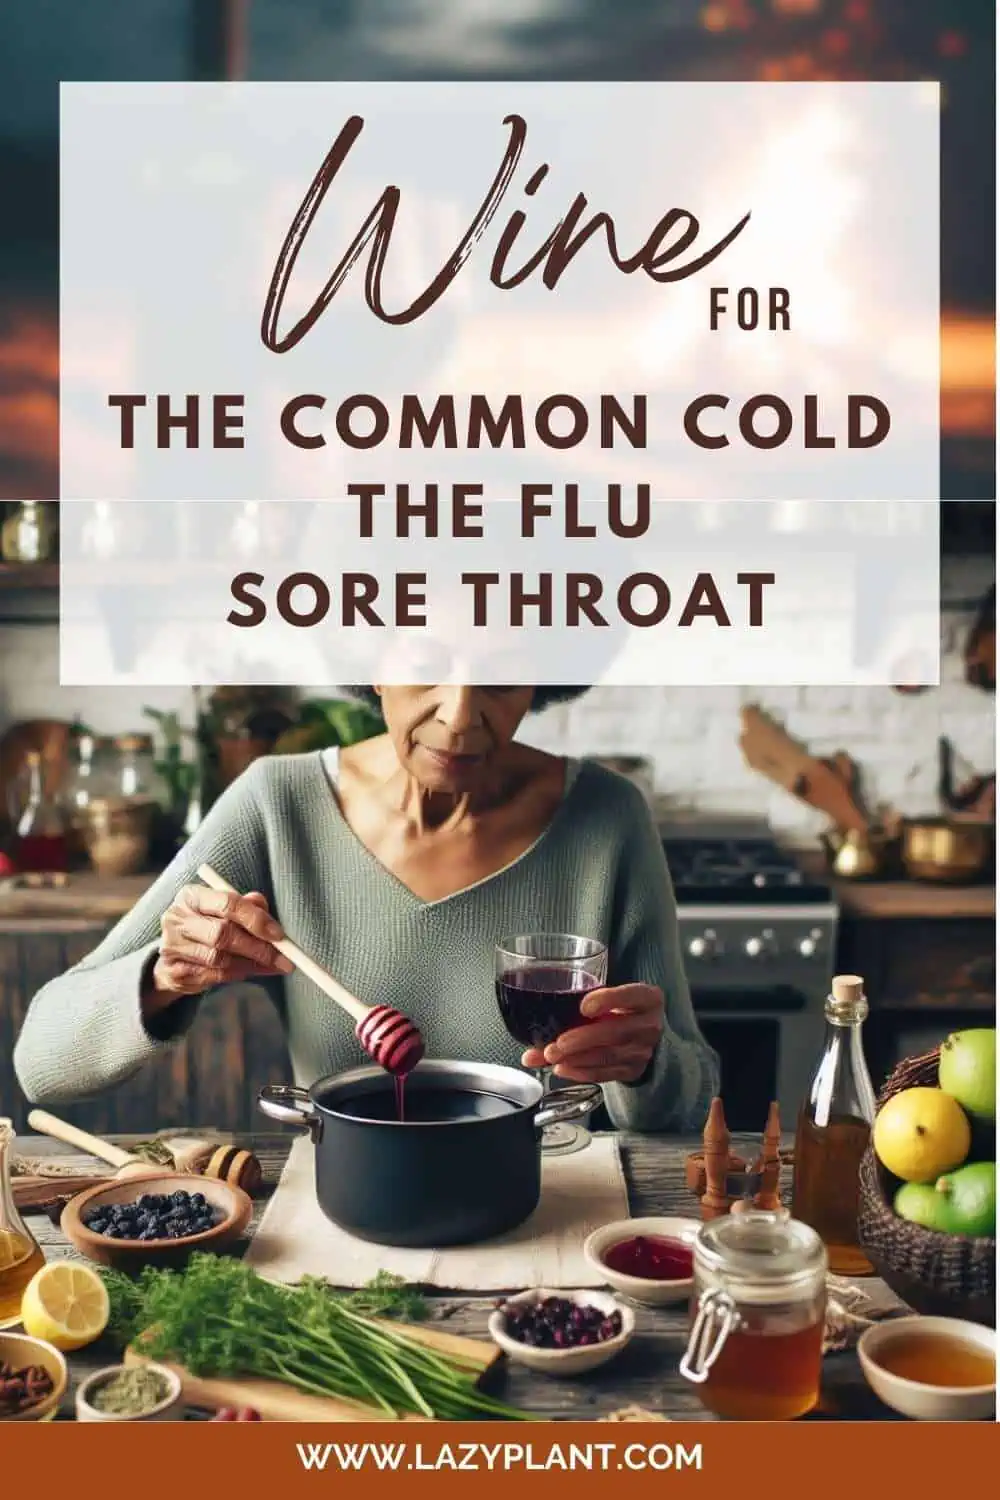 Health tip: Drinking red Wine for the flu, common cold & sore throat.